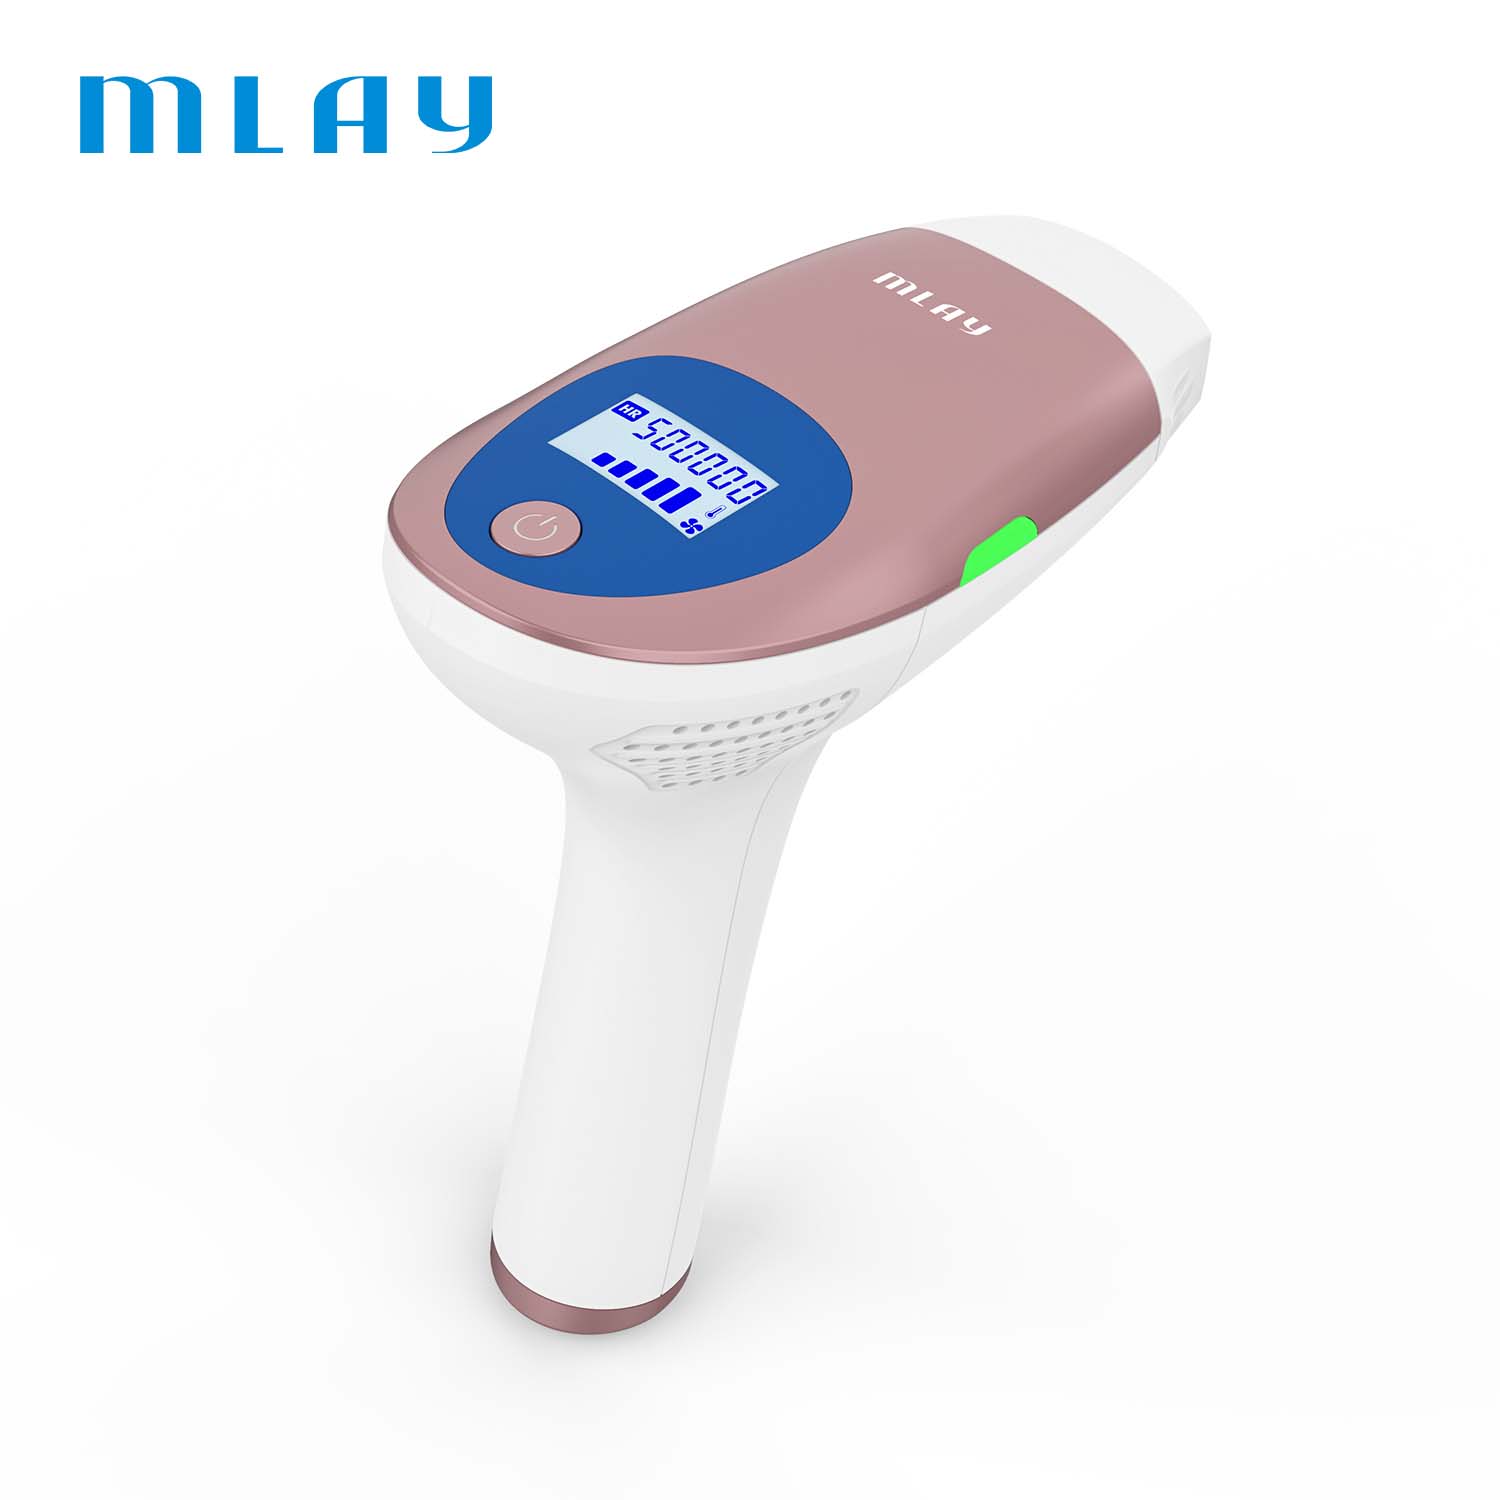 Hot Sell Mini Portable Ipl Laser Device Home Use 500000 Flashes Hair Removal Home Pulsed Laser Epilator